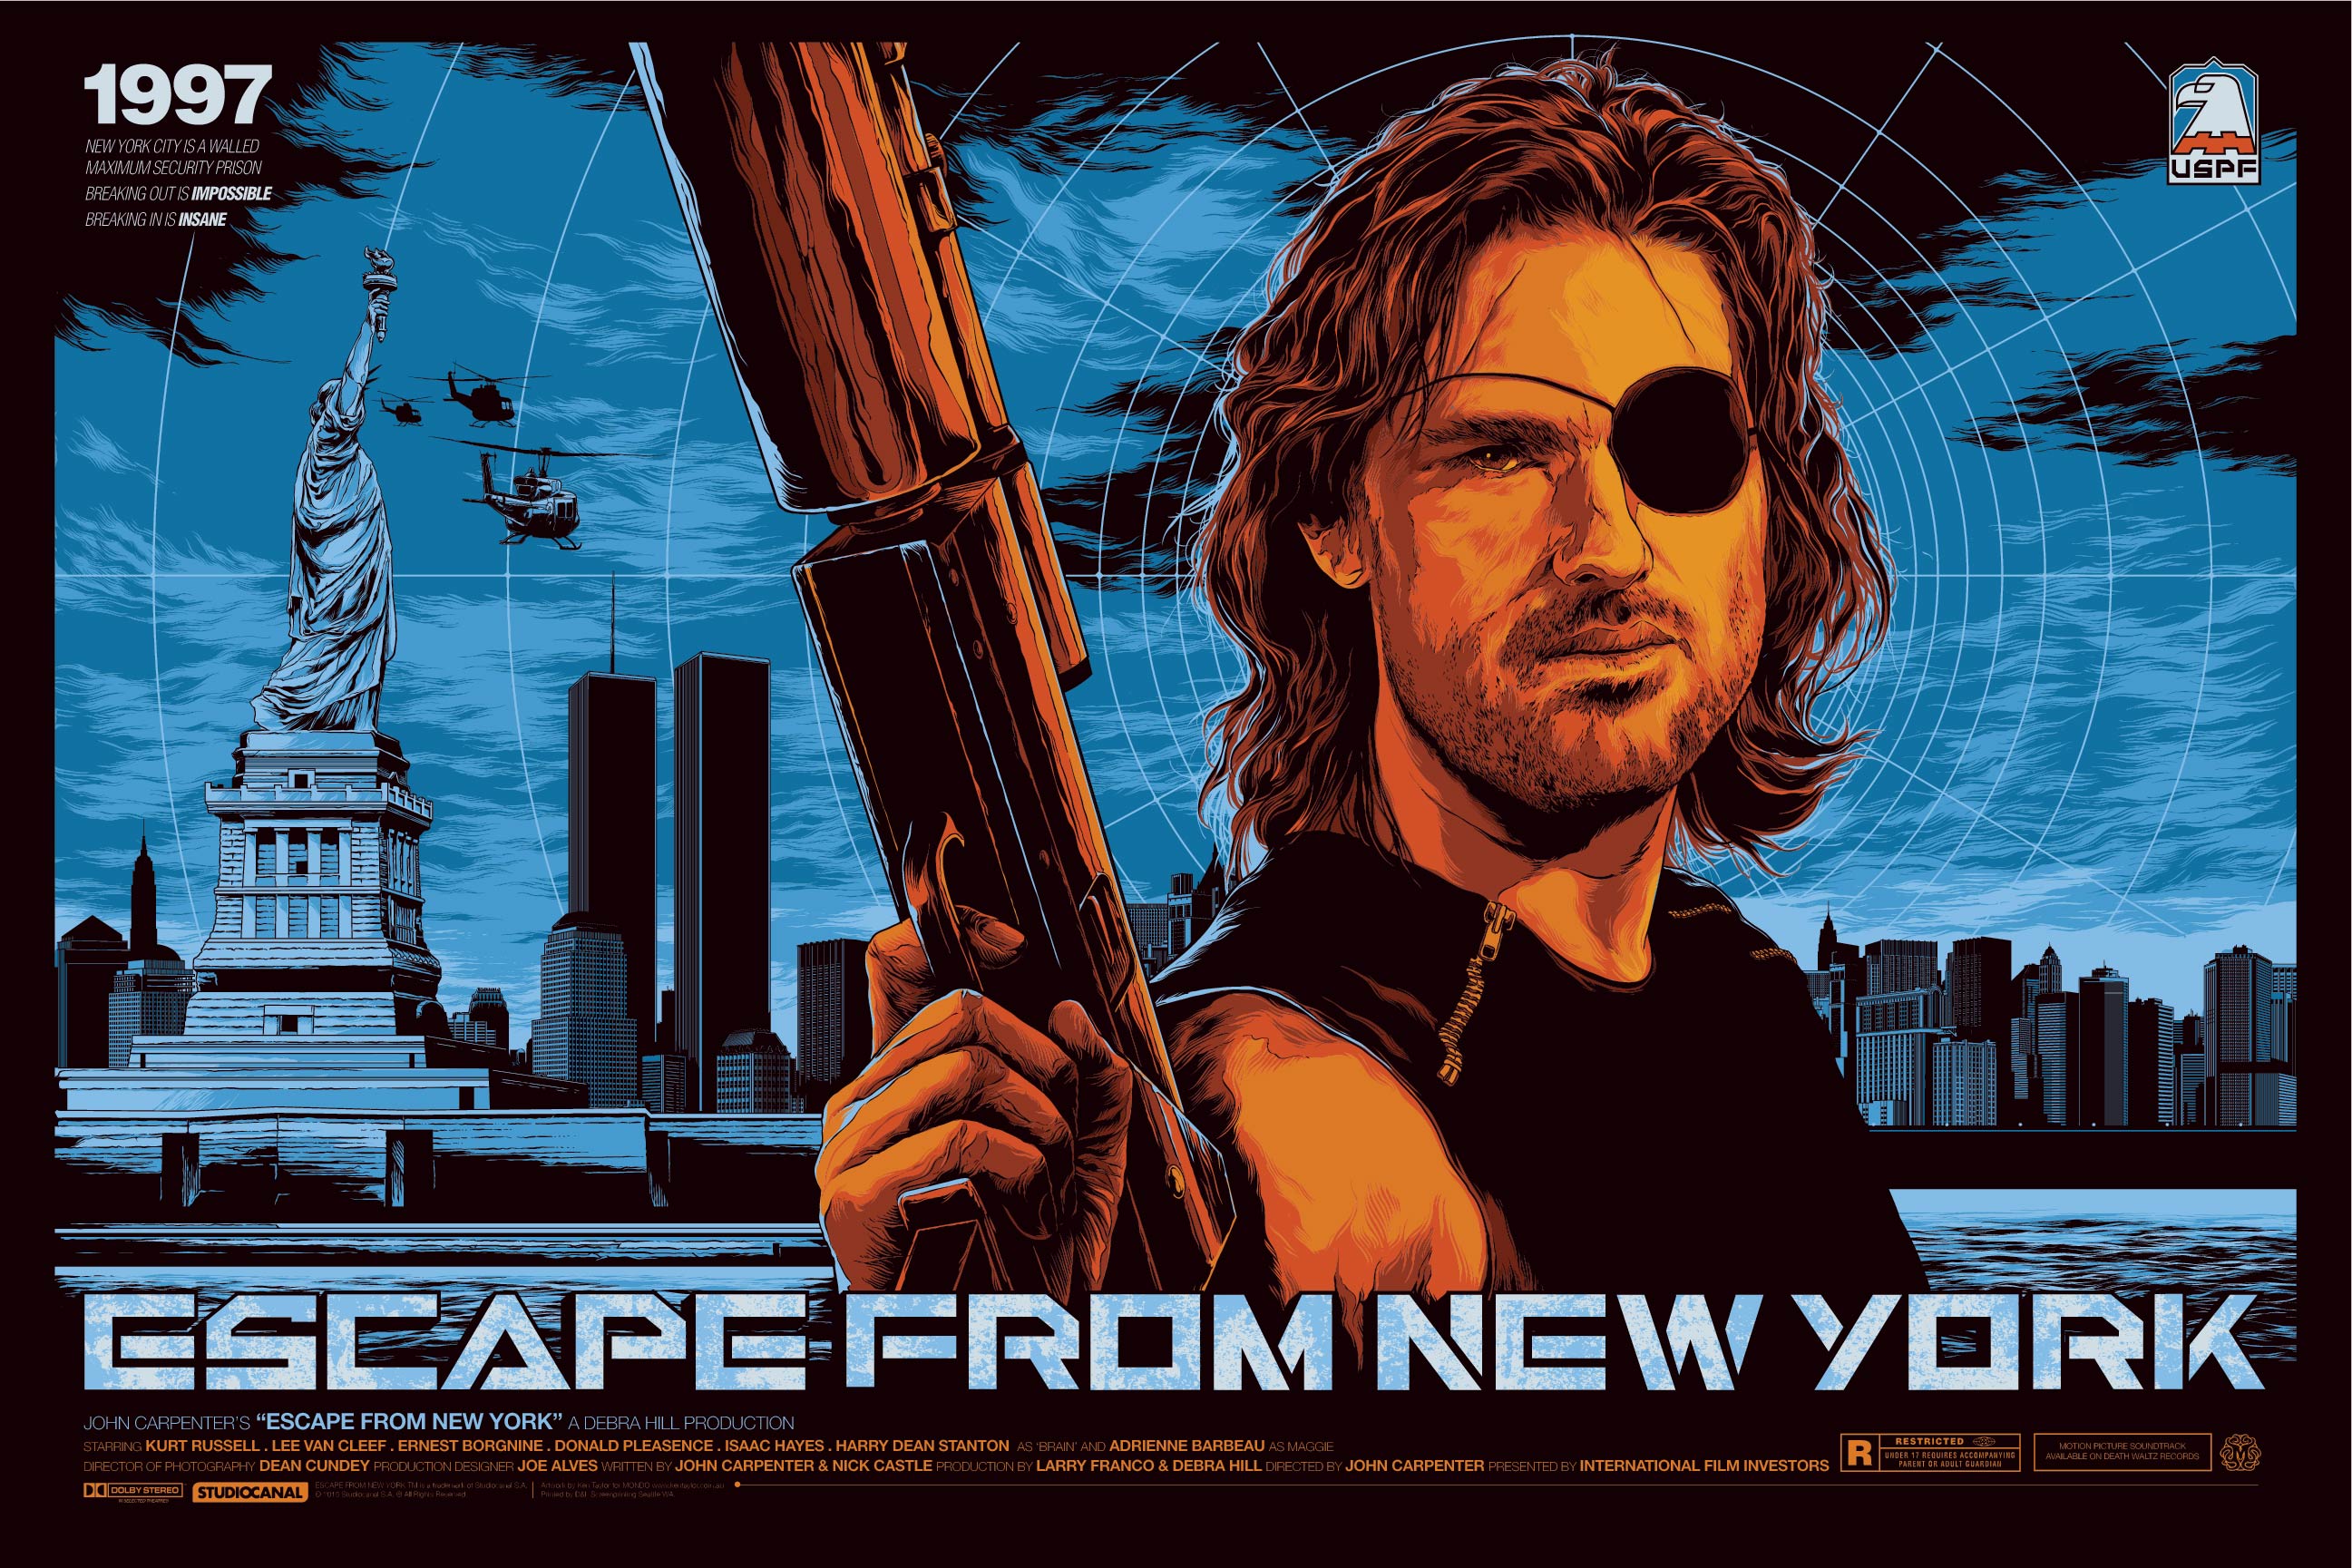 High Resolution Wallpaper | Escape From New York 2593x1729 px